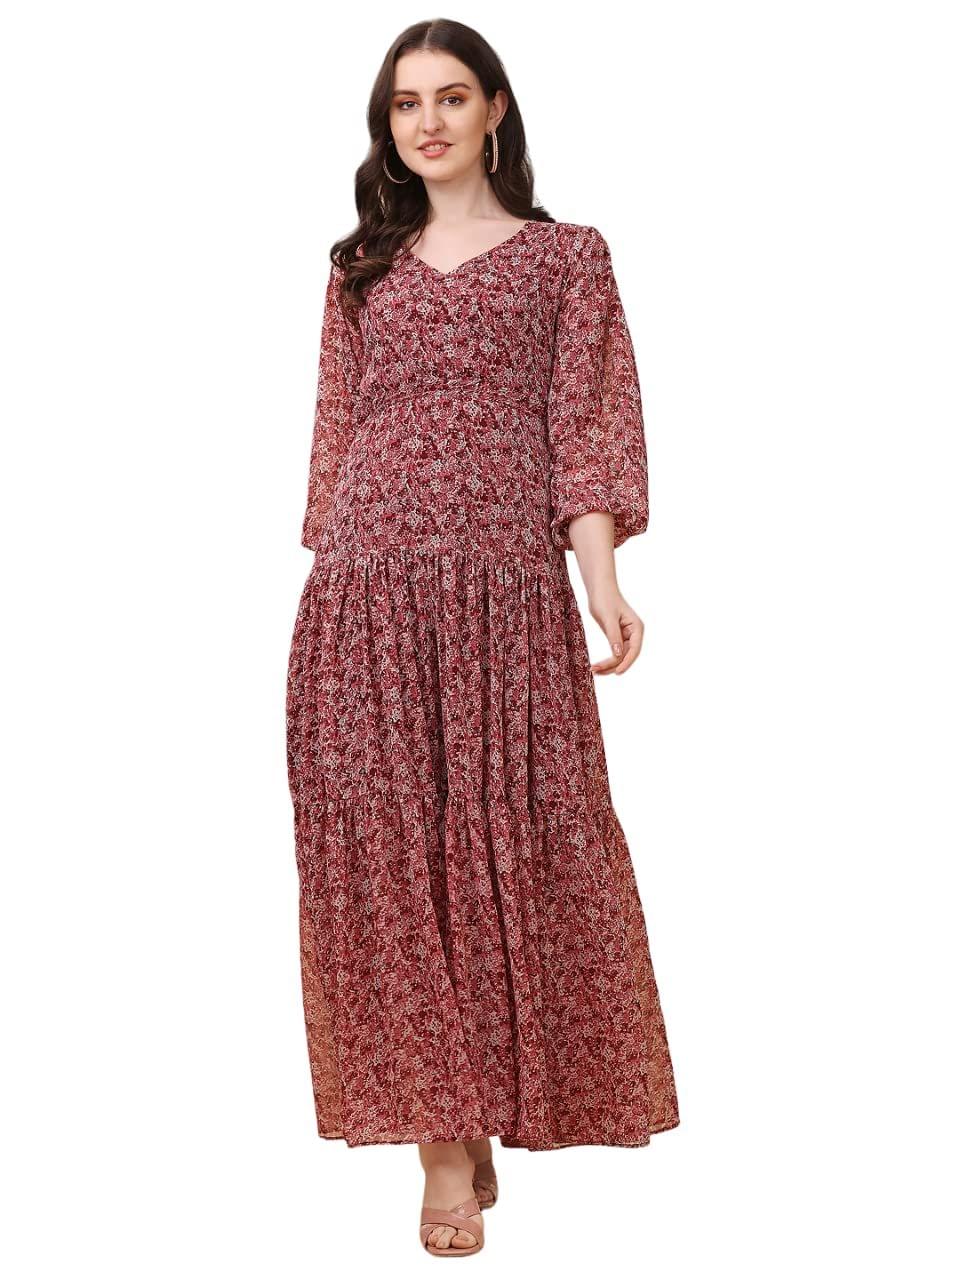 FASHION QUEEN Western Dresses for Women Purple & Grey Floral Print Maxi  Dress 3/4 Sleeves